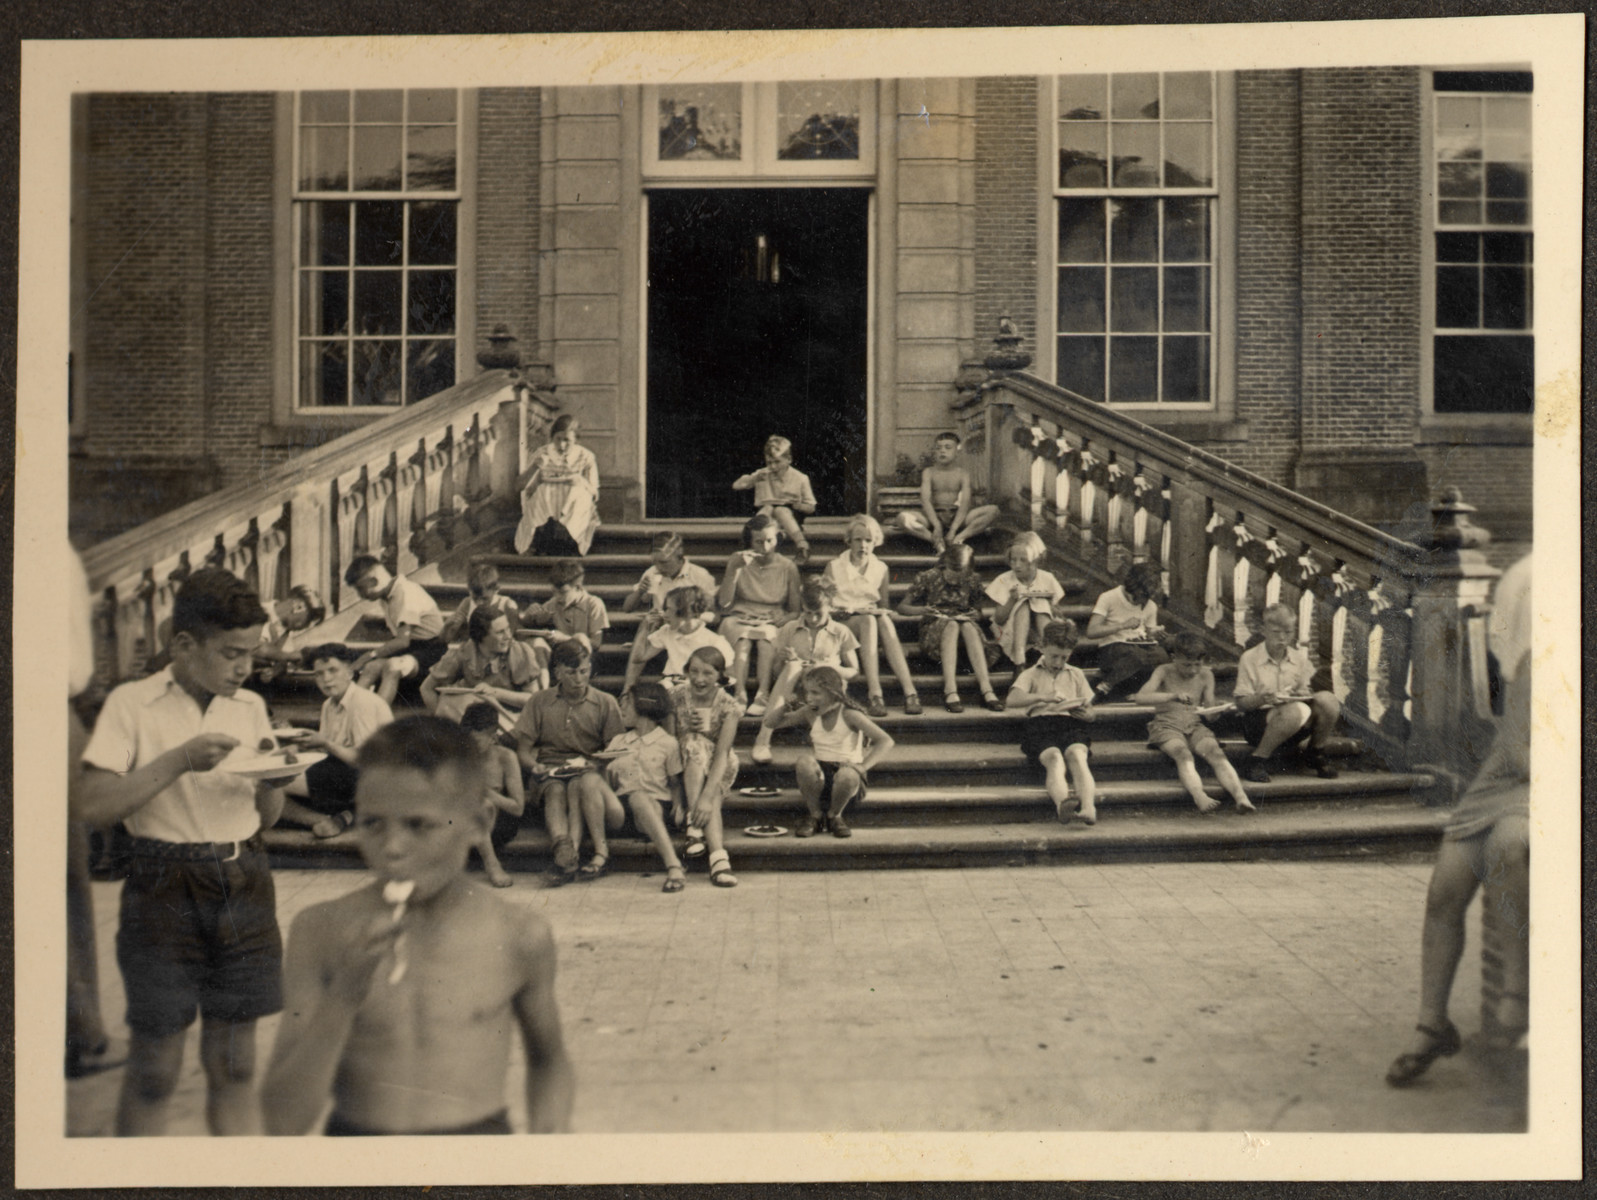 Children, many of them German Jewish refugees, relax on the steps of a Quaker boarding school in Eerde.